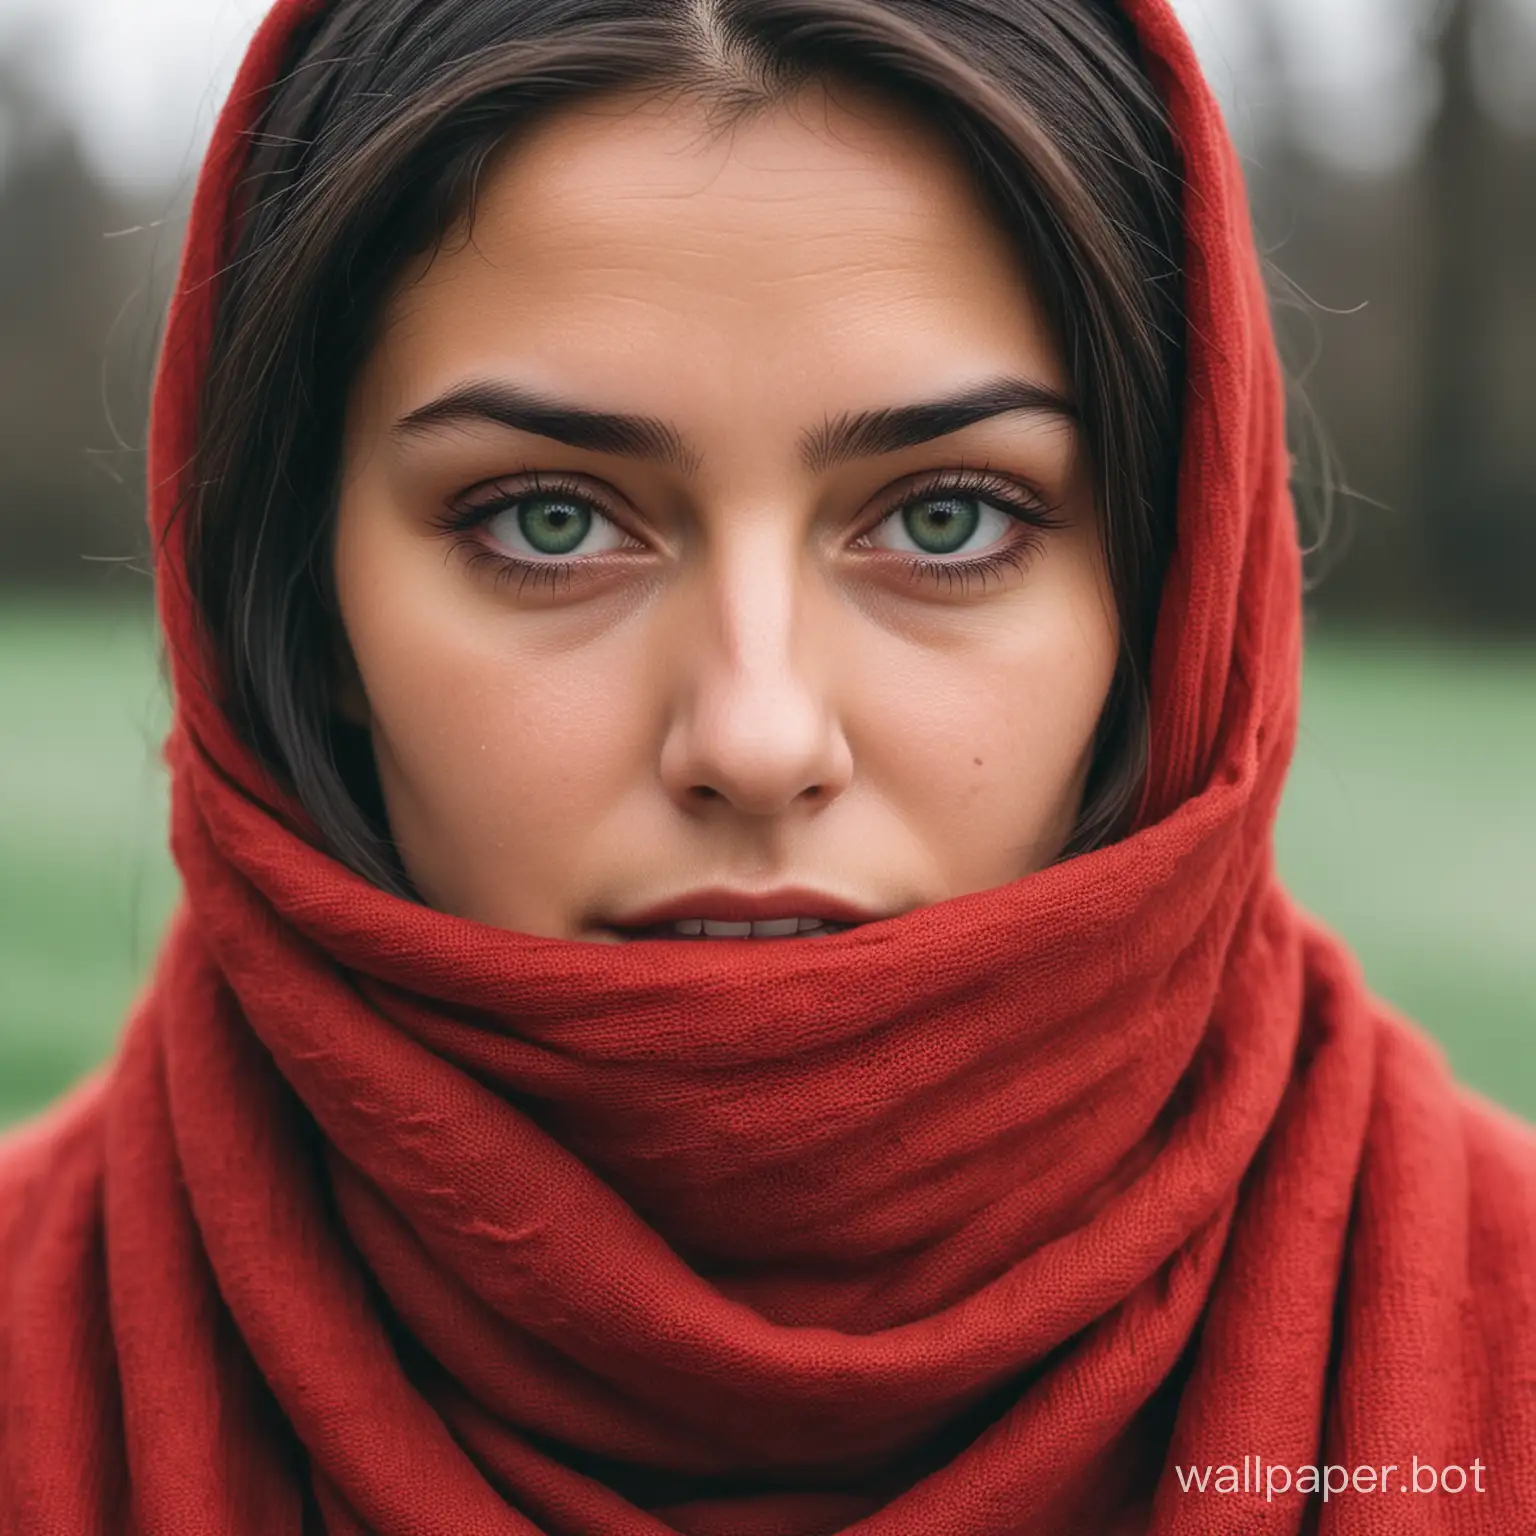 A woman wearing a weather-worn red shawl covered mouth staring at me with dark green eyes